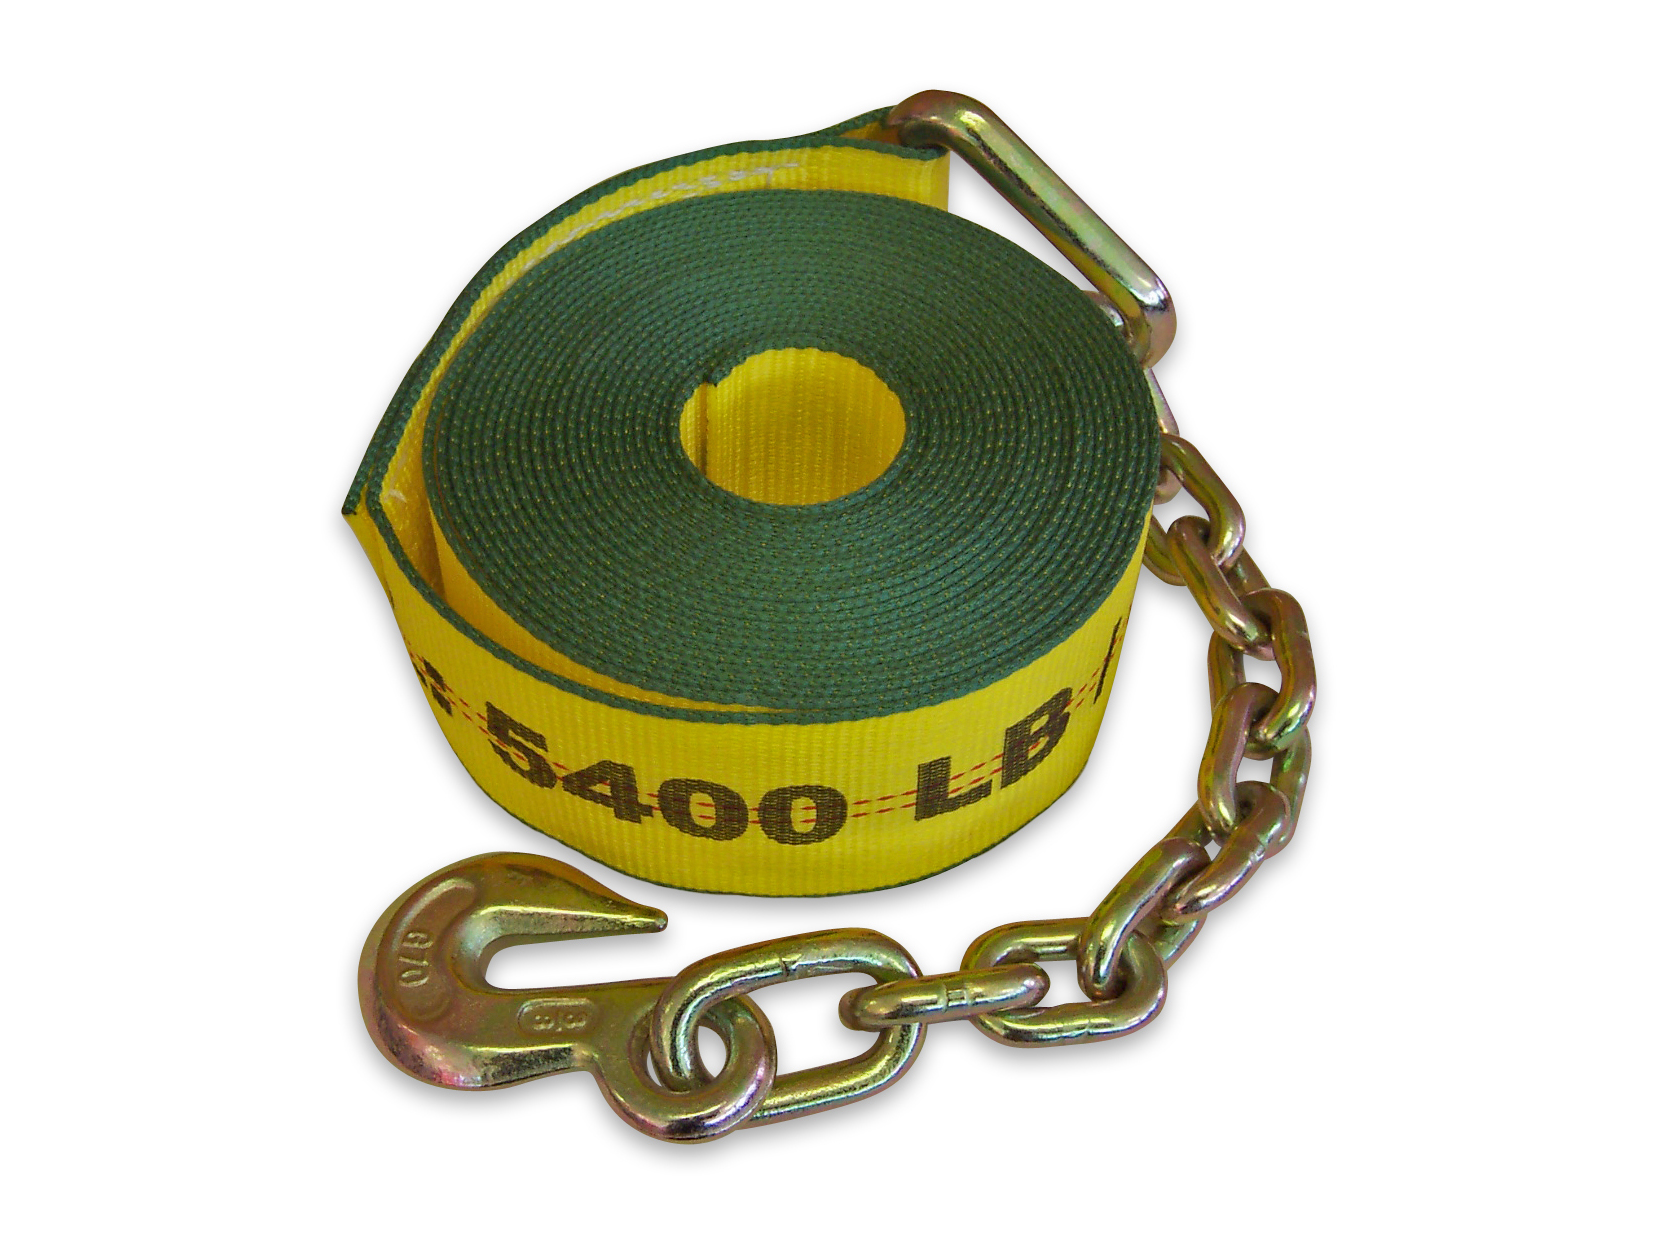 3"x30' free end strap (ring, chain or hook)